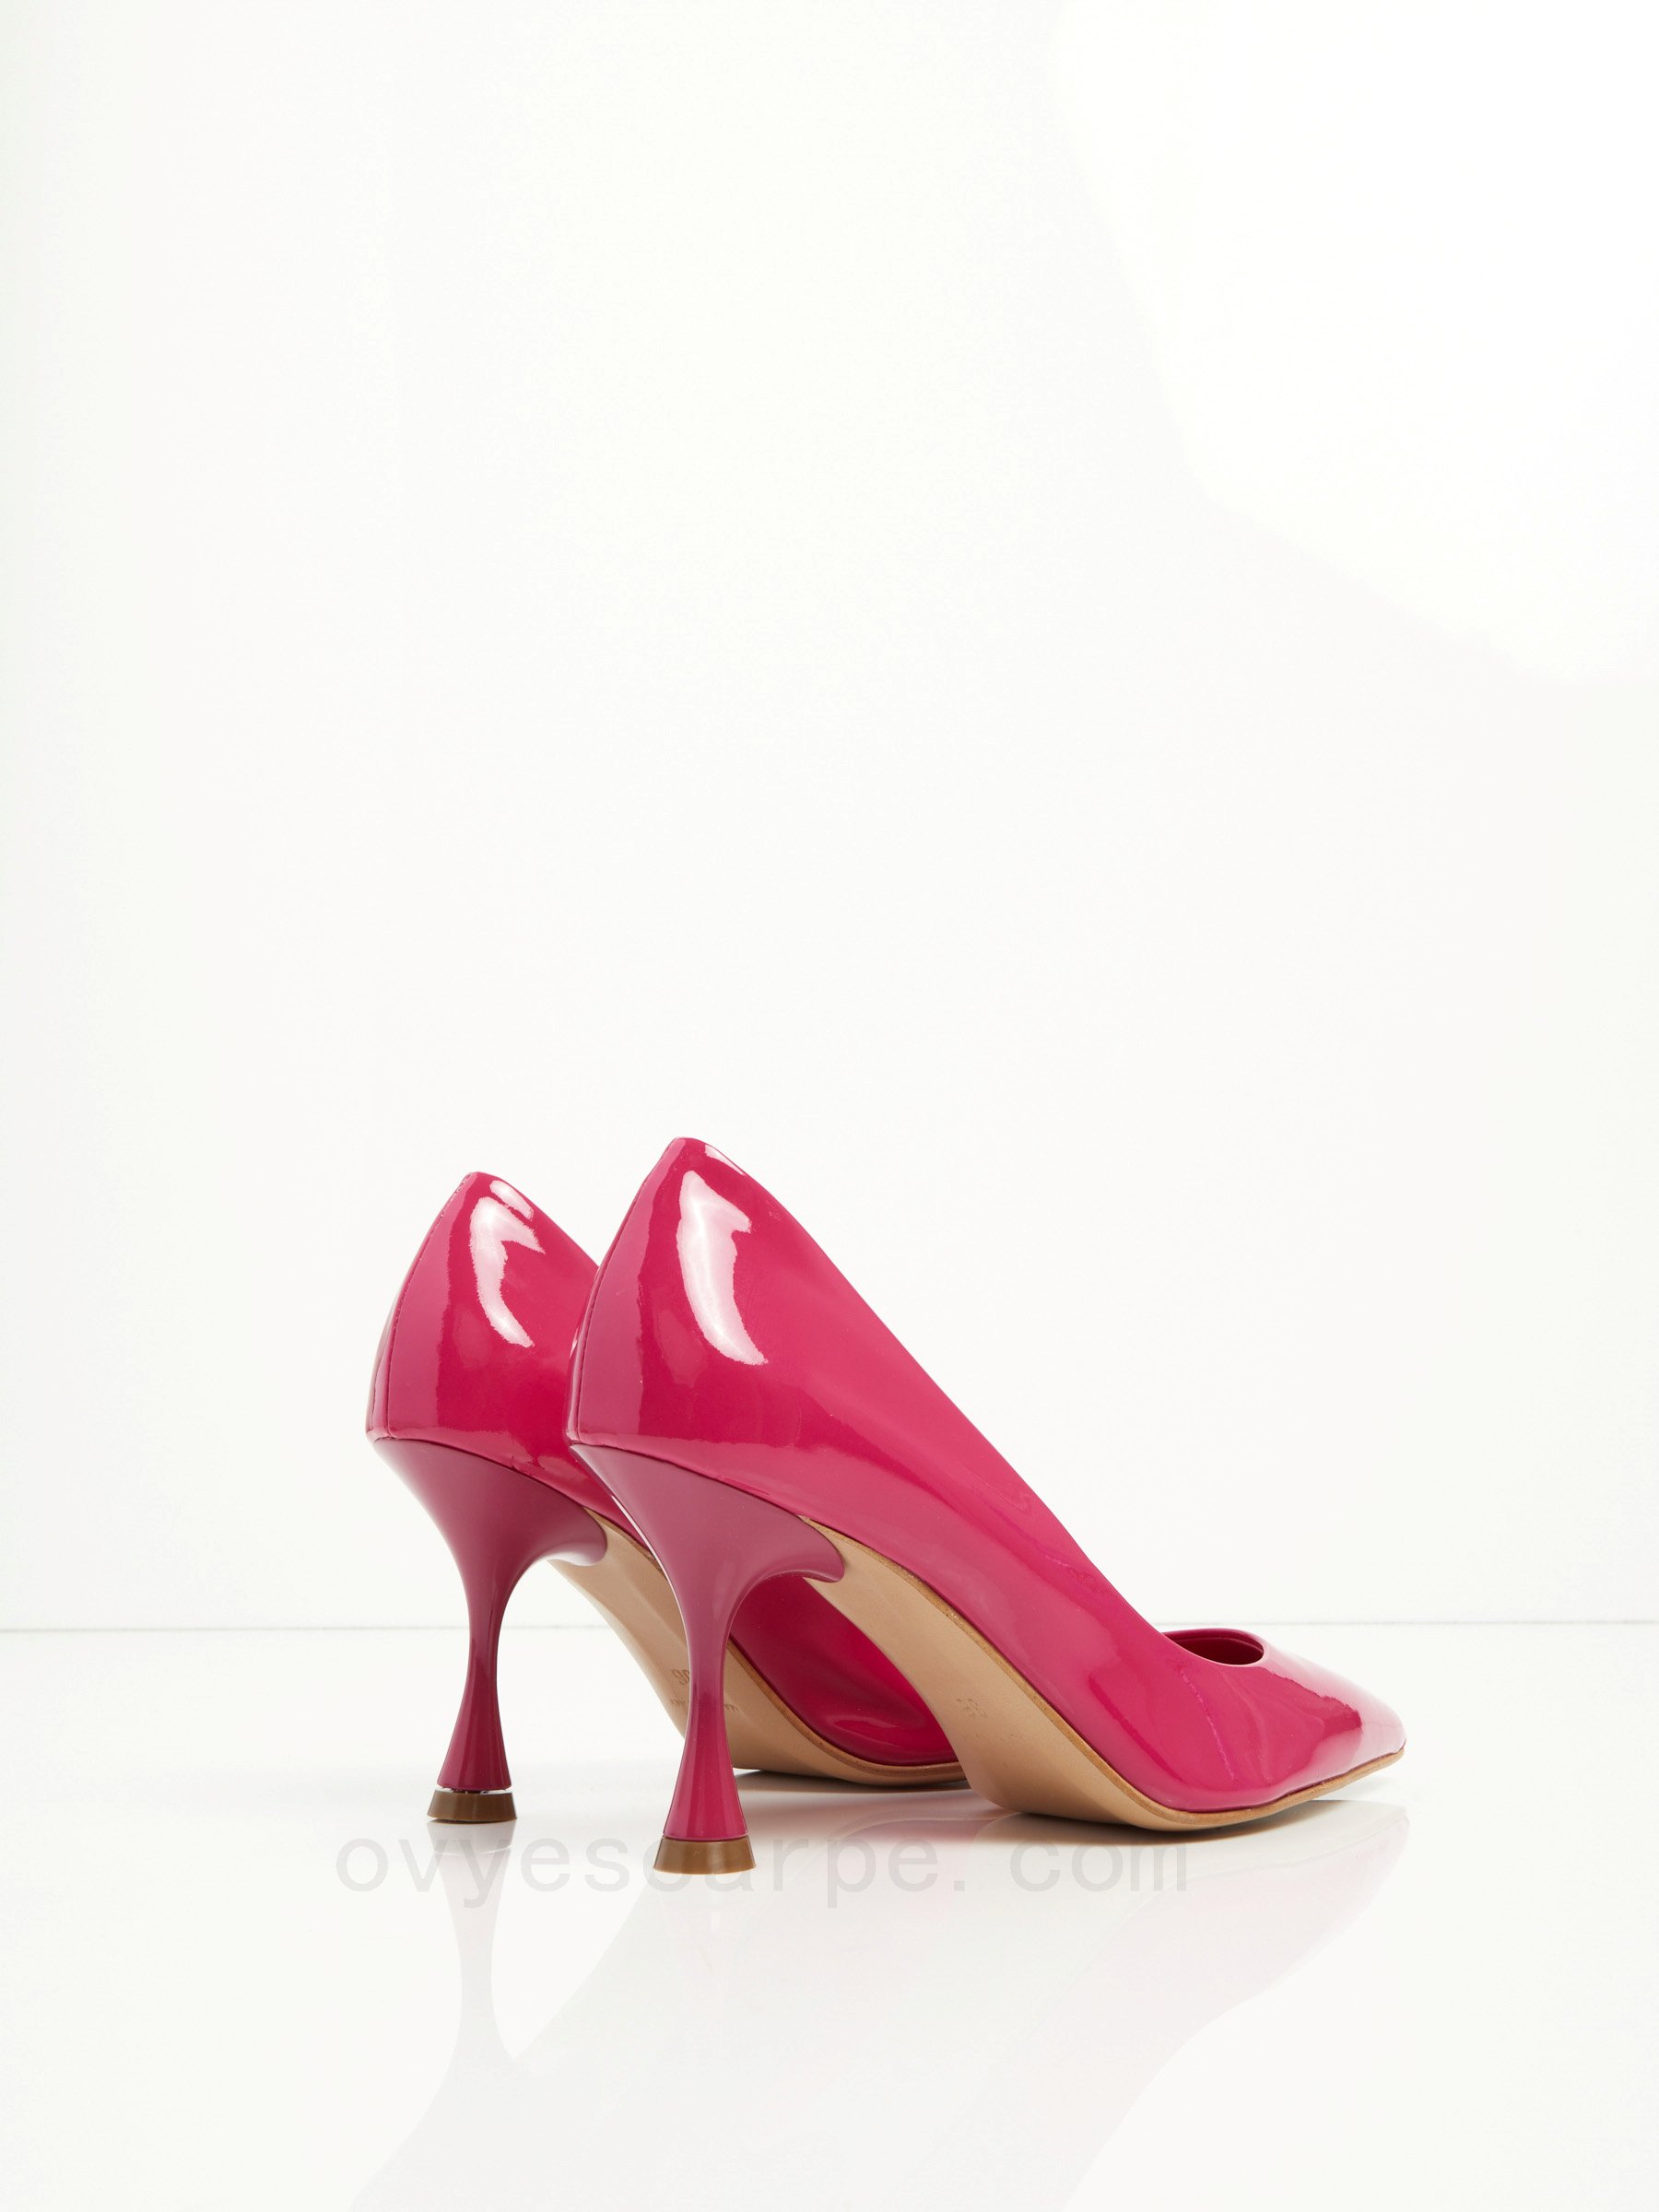 Outlet Online Patent Leather Pumps F08161027-0474 Migliori